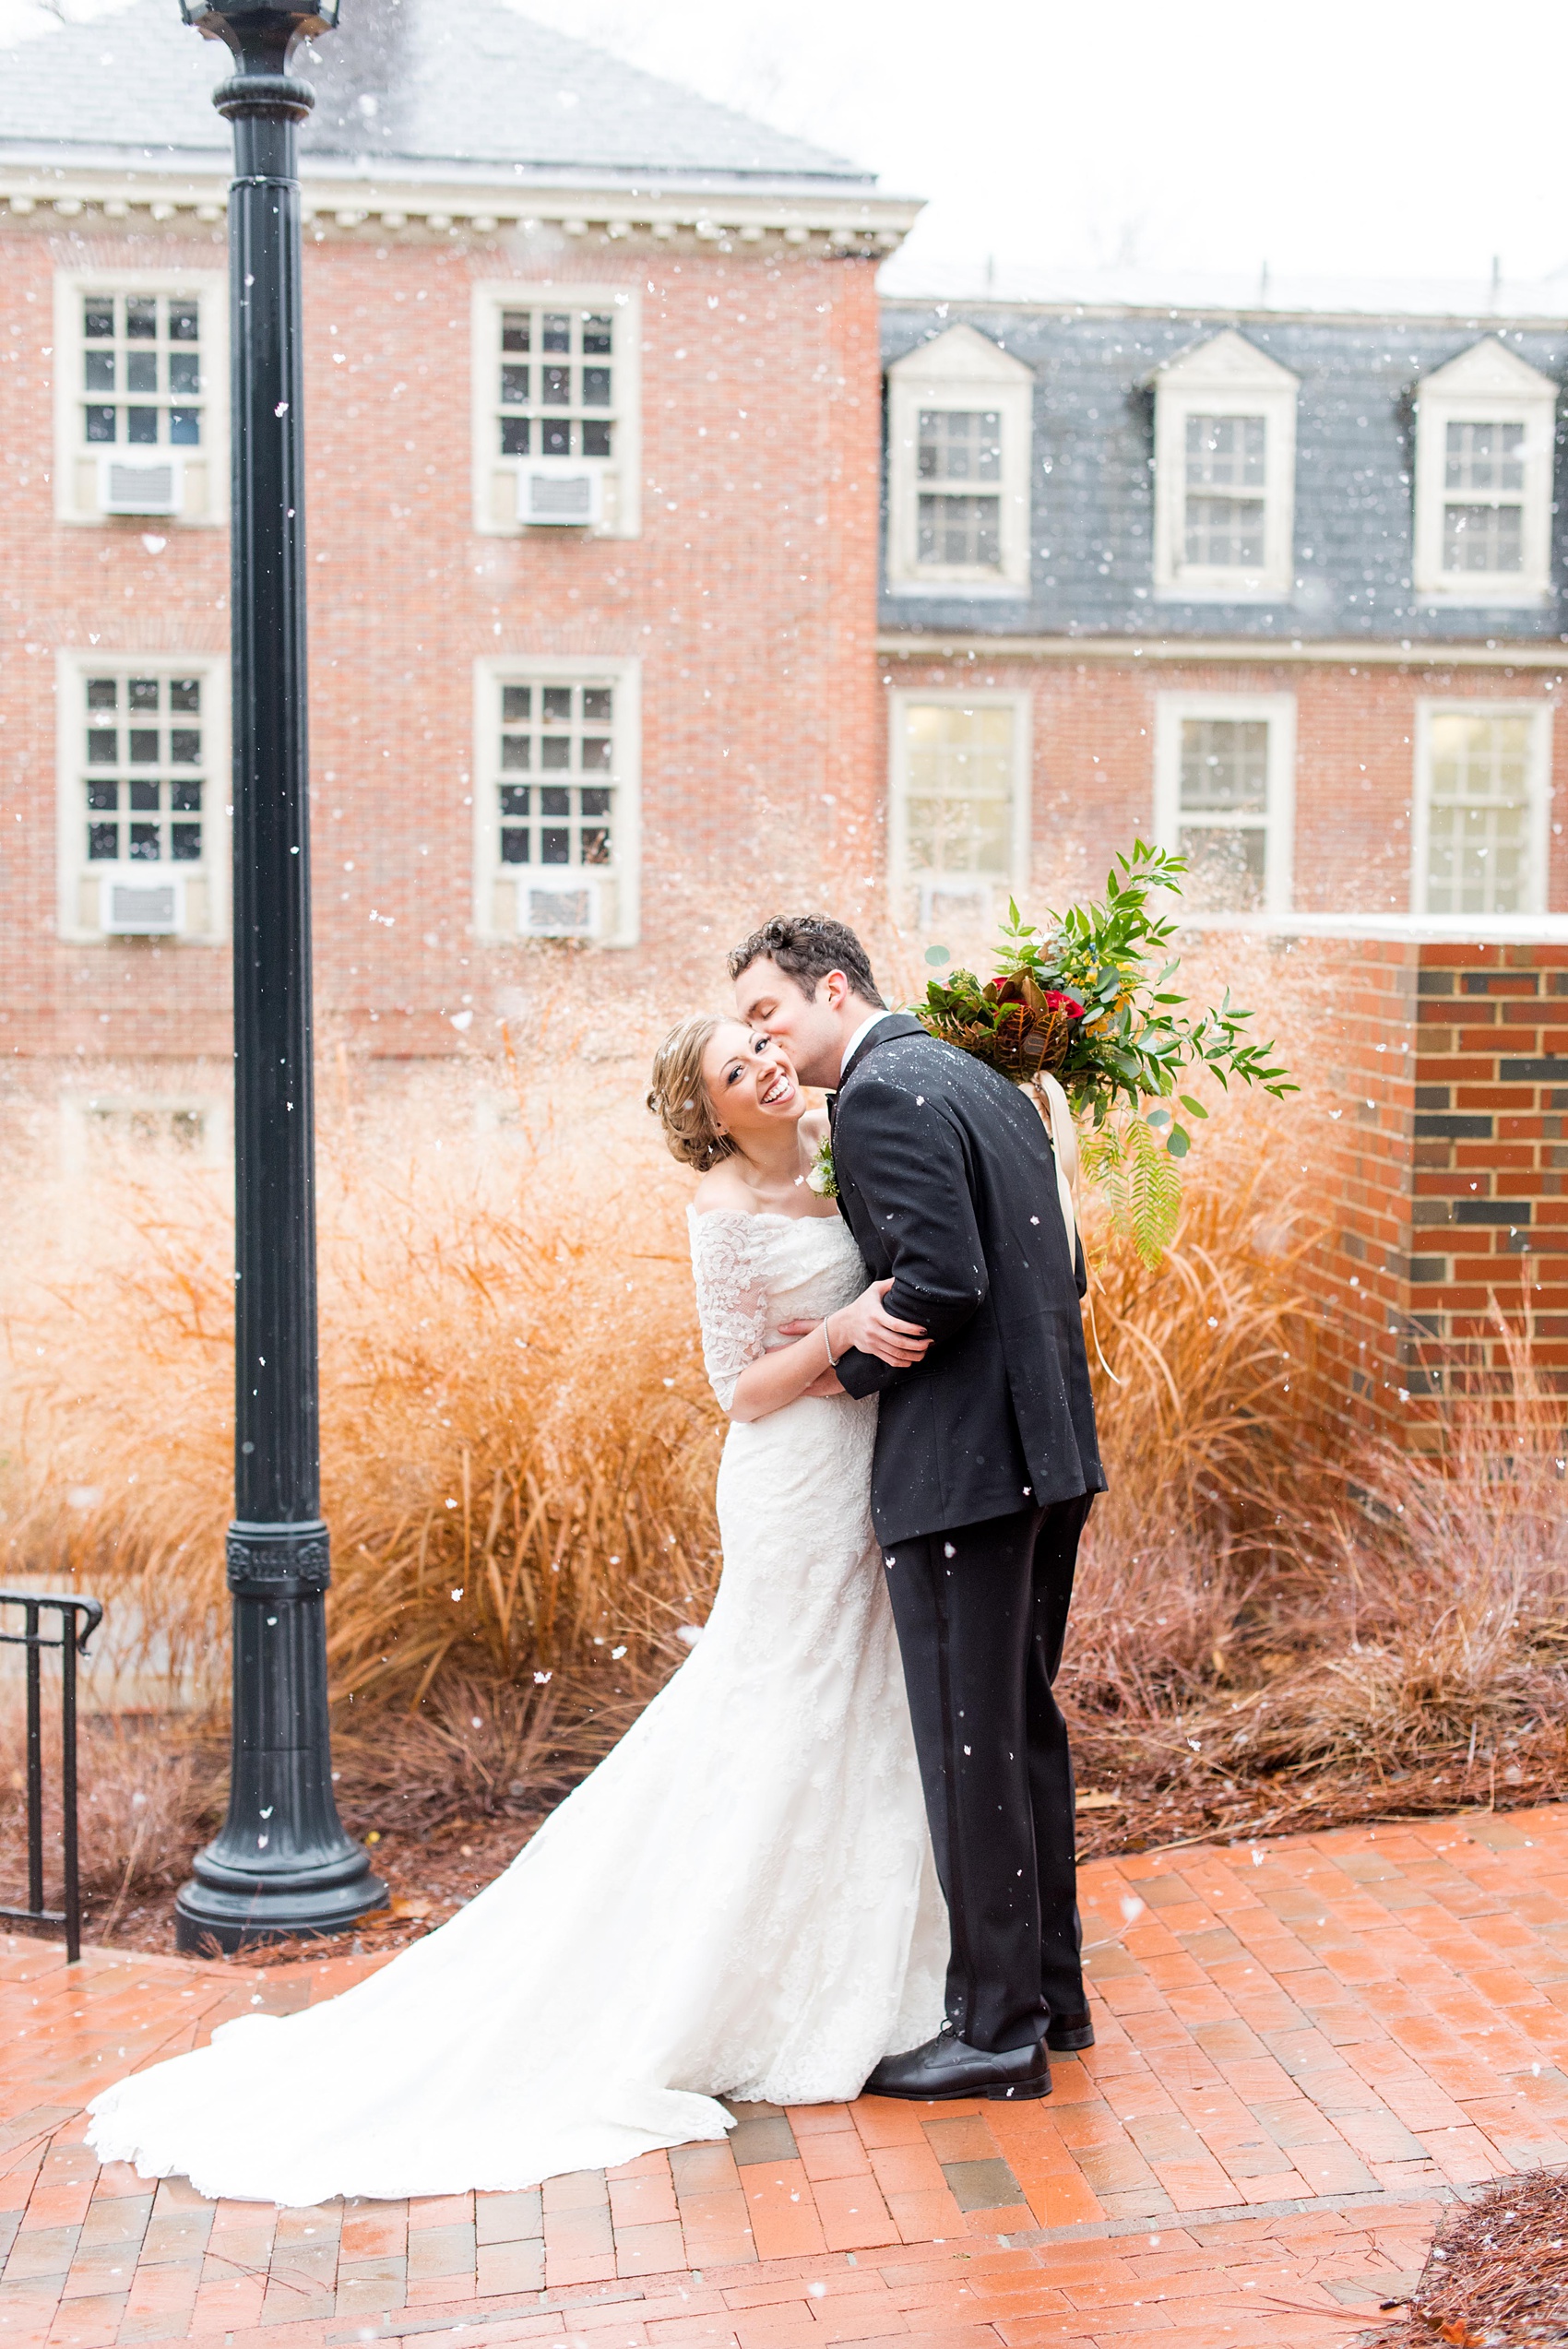 Mikkel Paige Photography photos at The Carolina Inn for a warm and colorful winter wedding. Picture of the bride and groom on their snowy day in Chapel Hill, NC. 